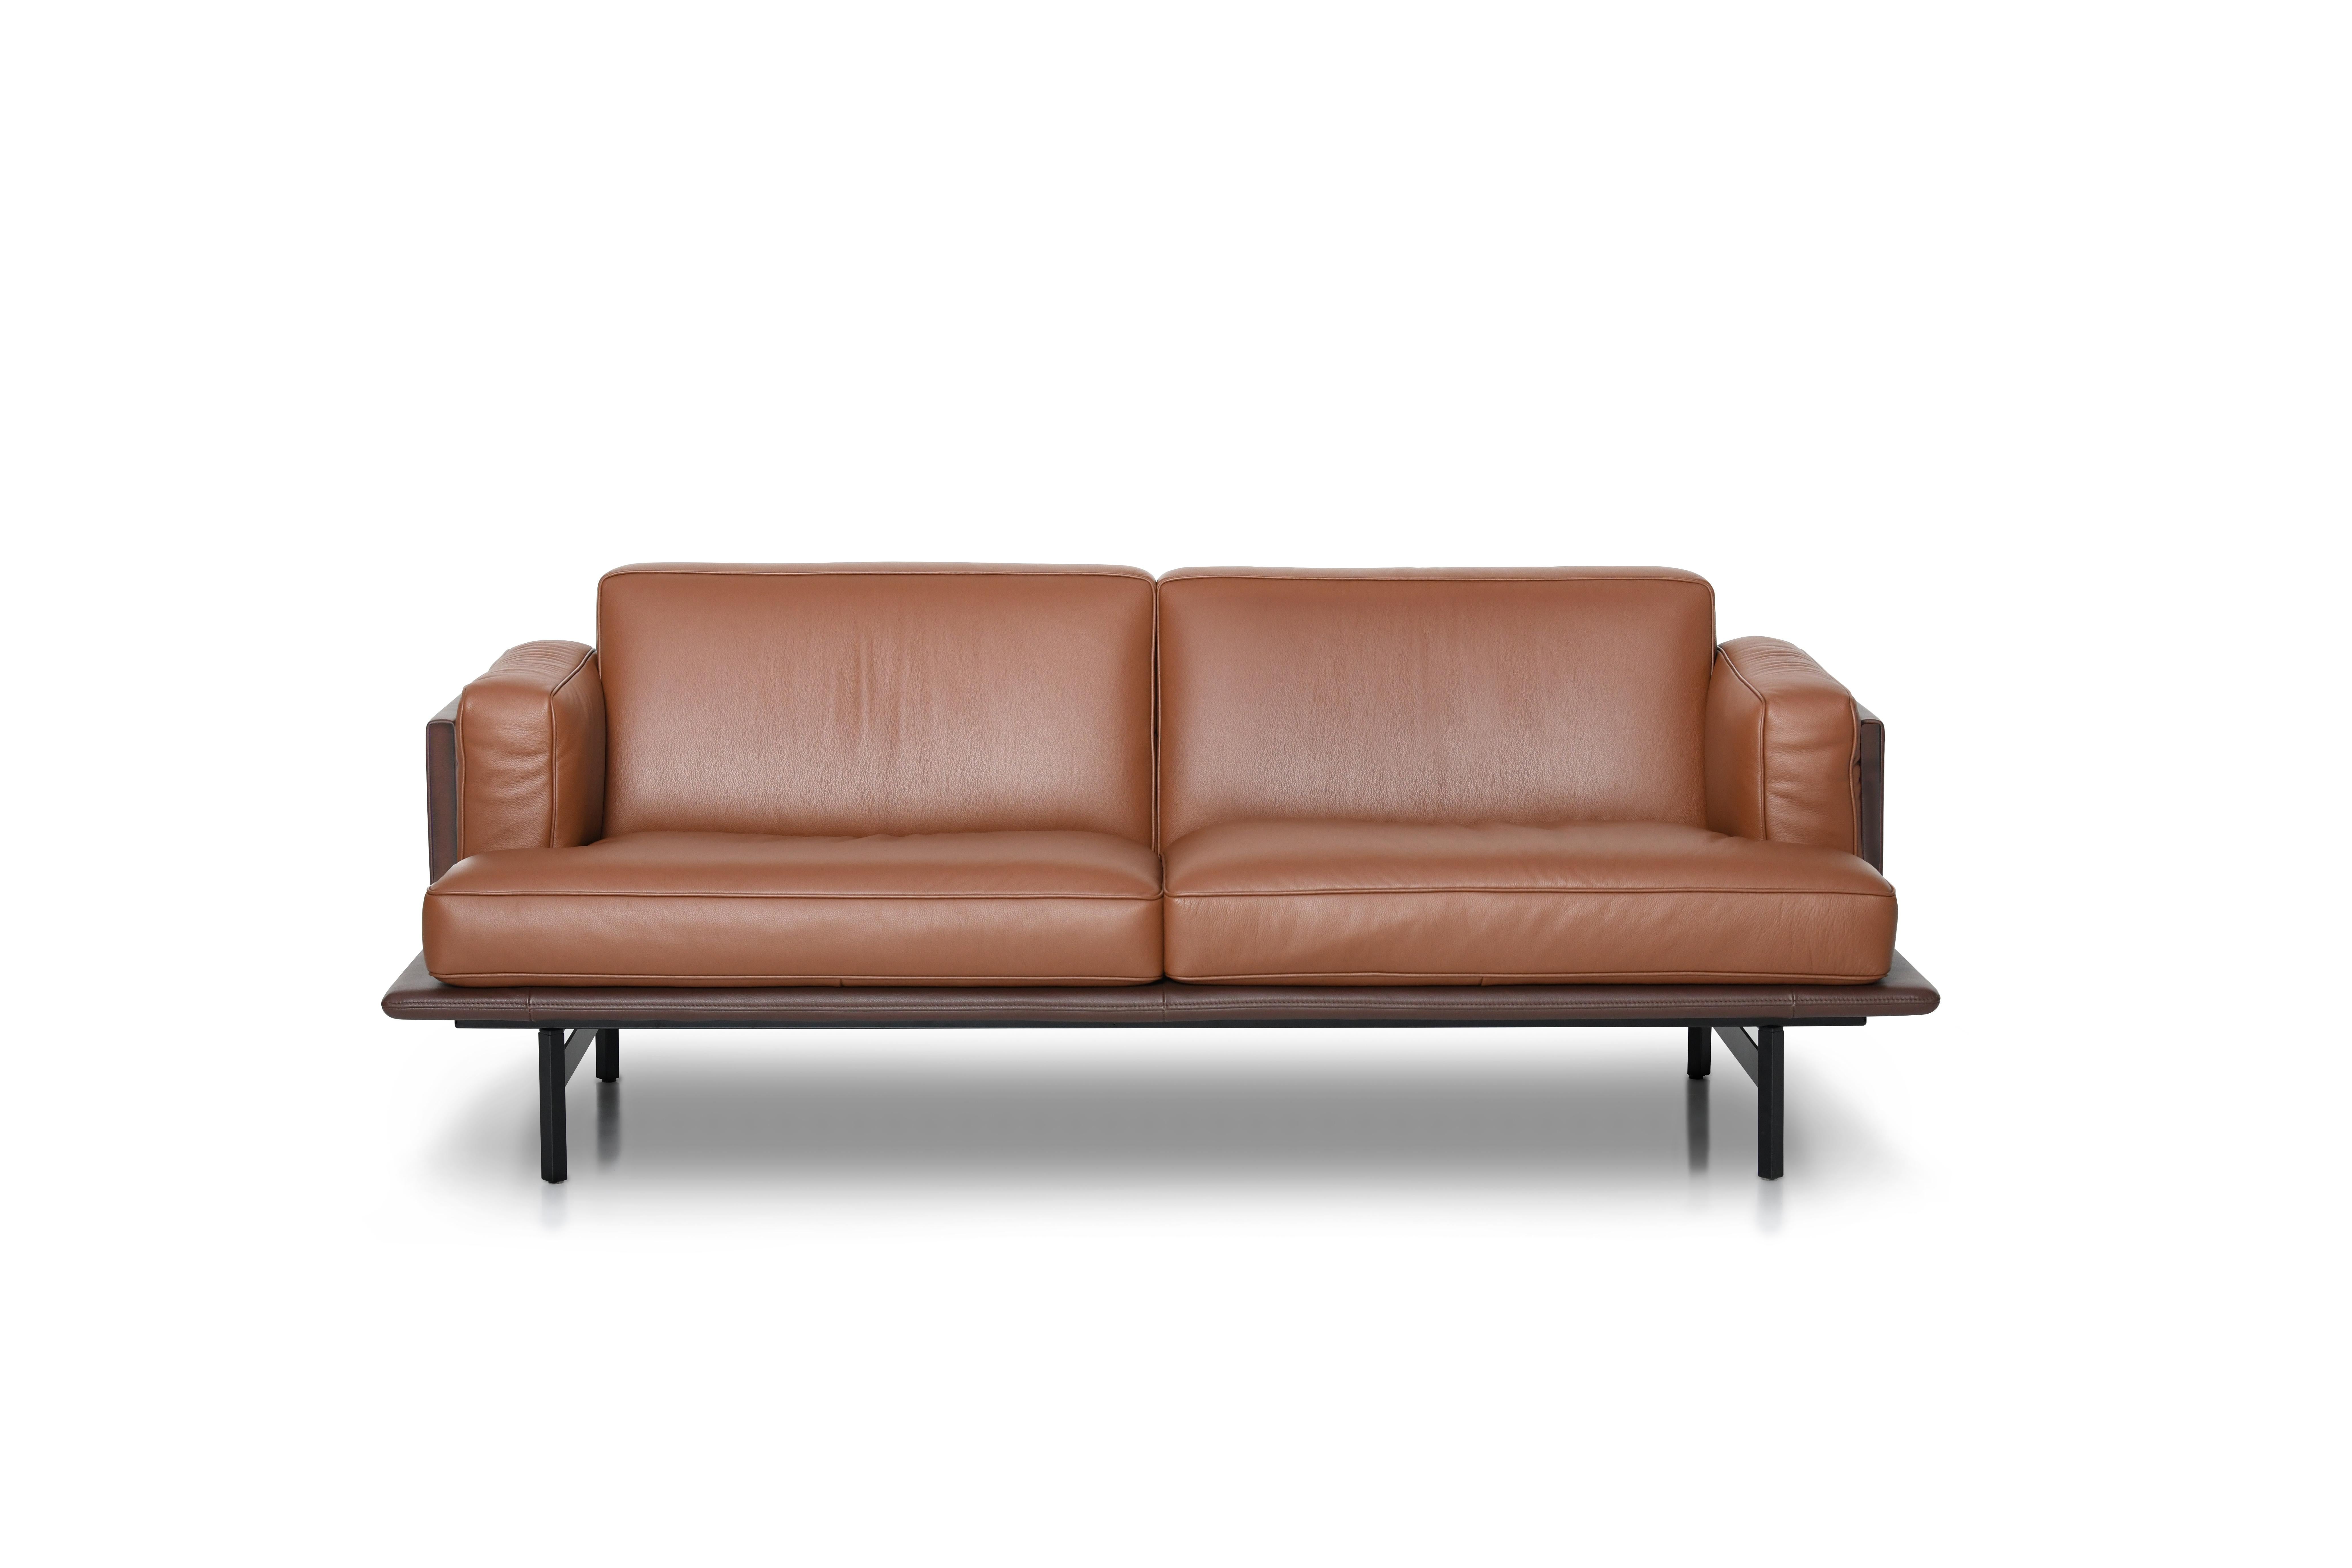 DS-175 sofa by De Sede
Designer: Patrick Norguet
Dimensions: D 56 x W 180 x H 74
Materials: steel with matt coating (leather, fabric).
Prices may change according to the chosen materials and size. 

Belle époque meets French touch
 
It is